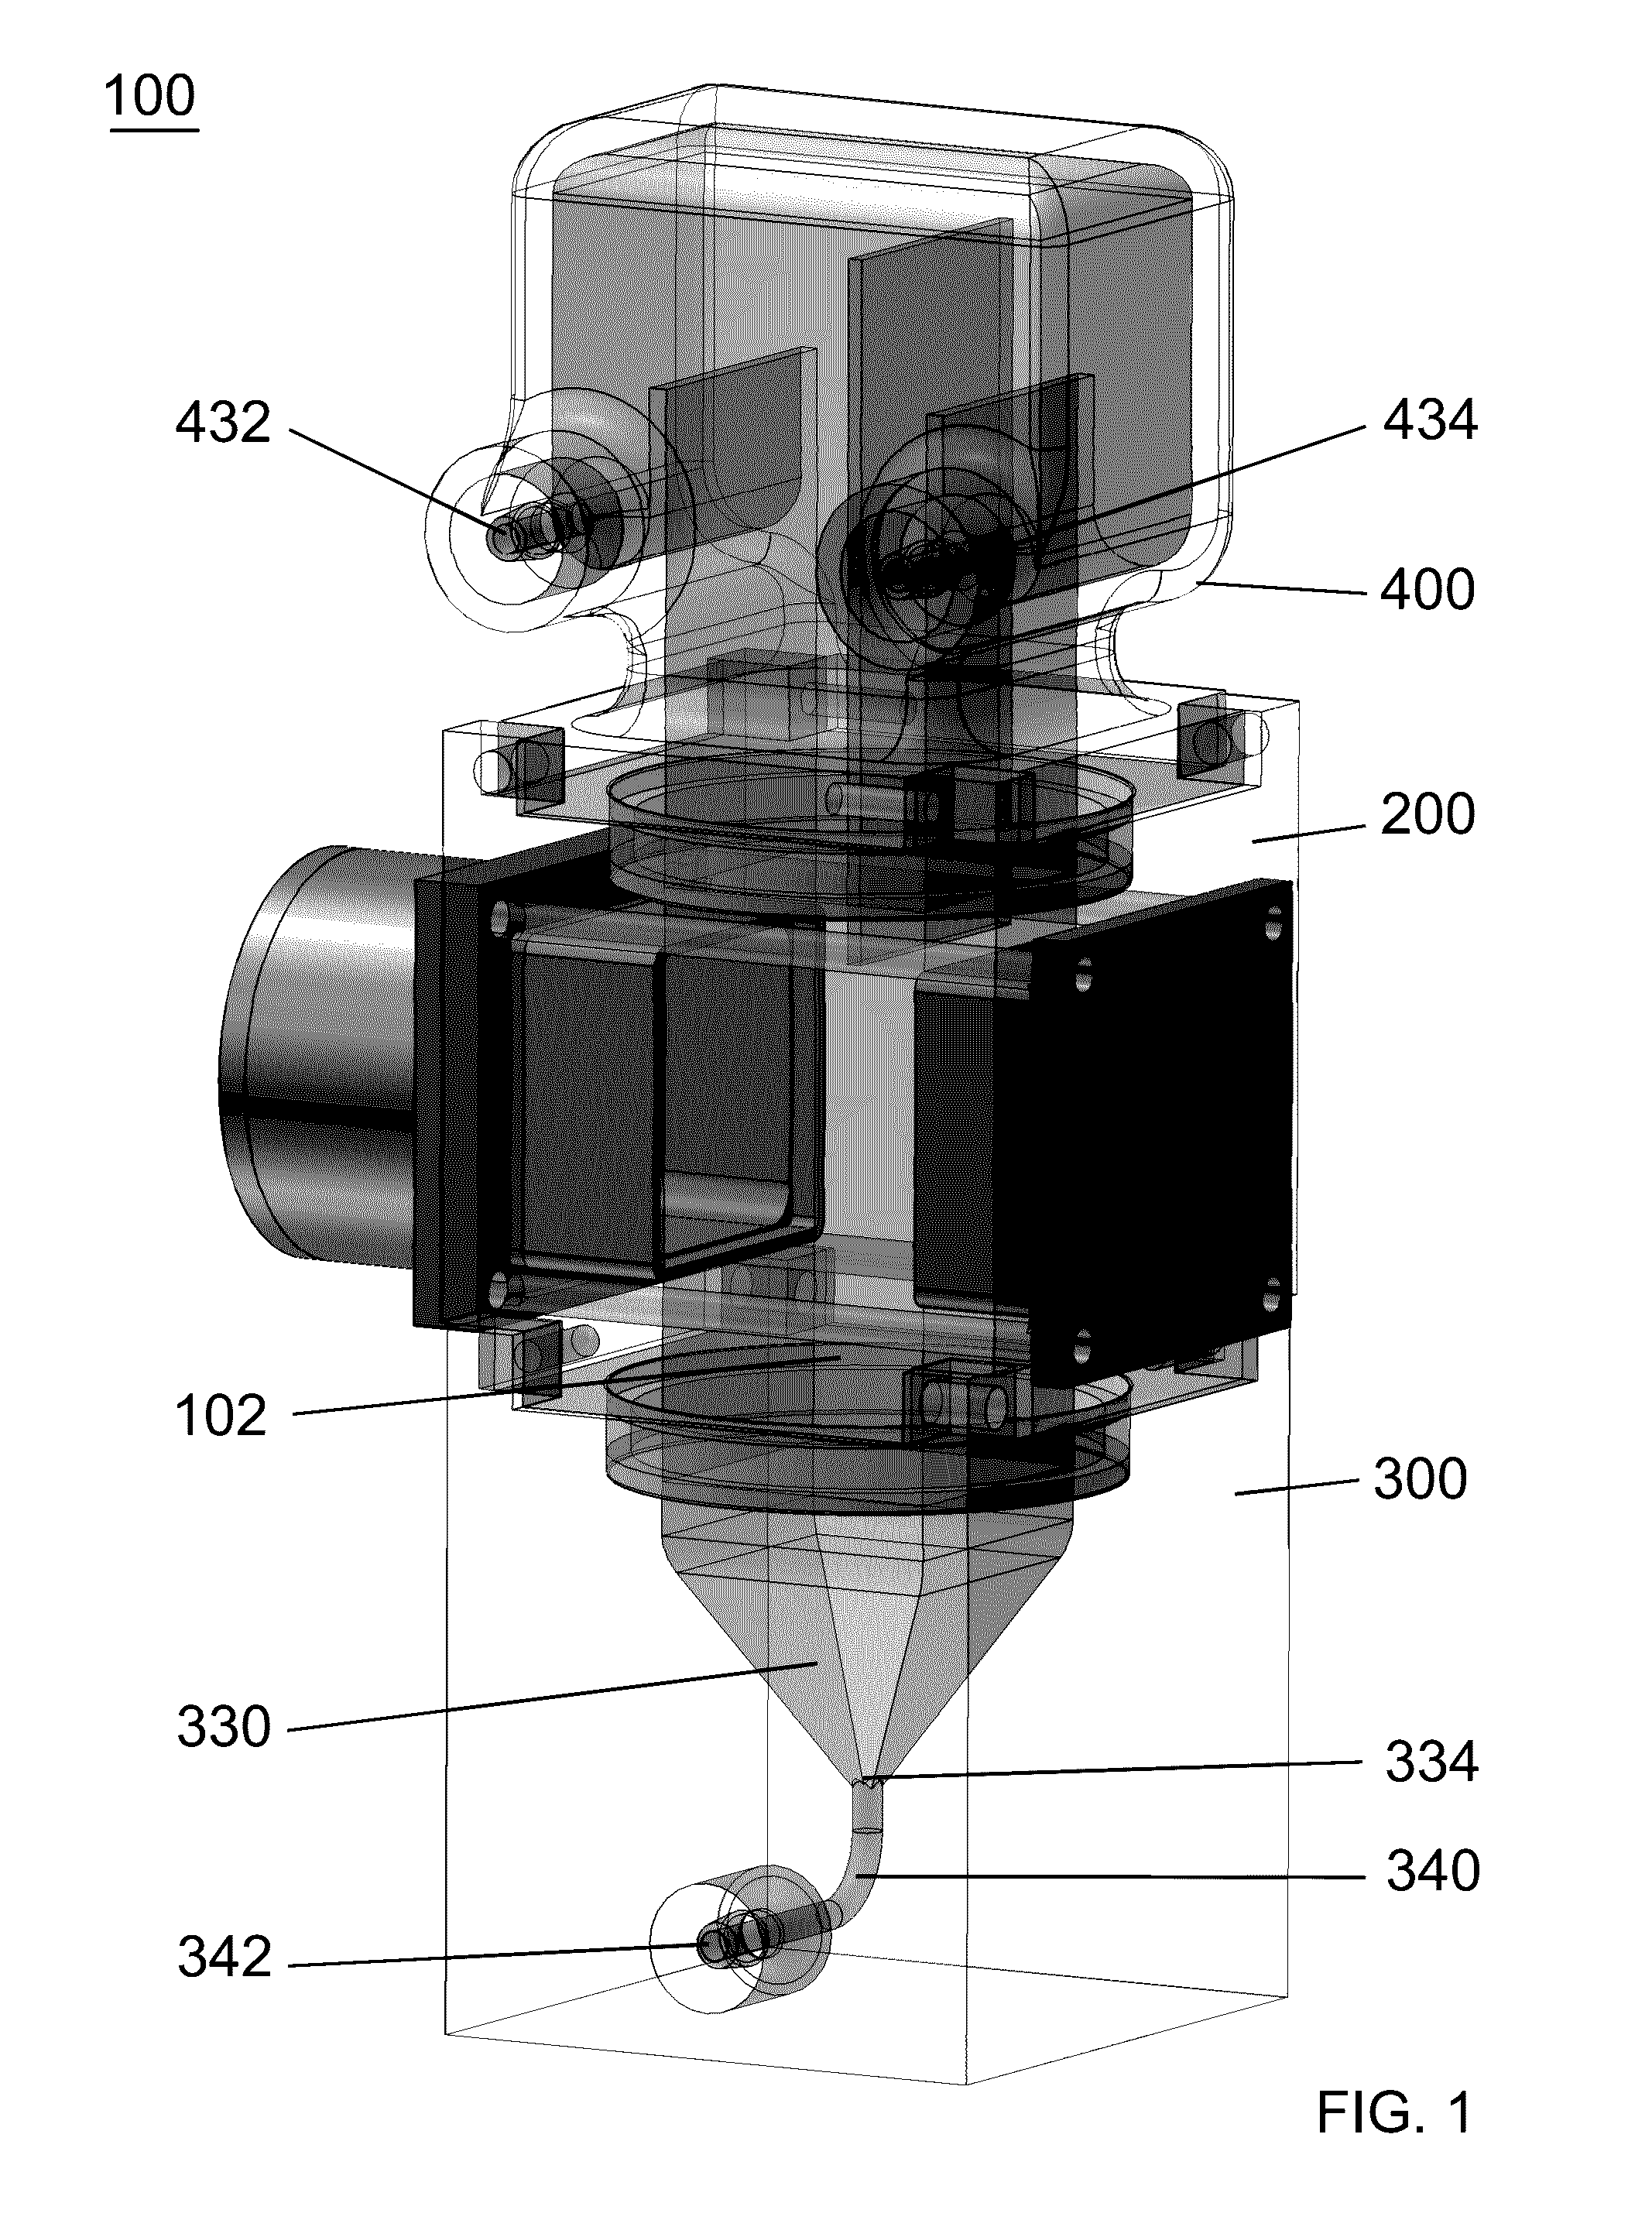 Acoustophoresis device with modular components